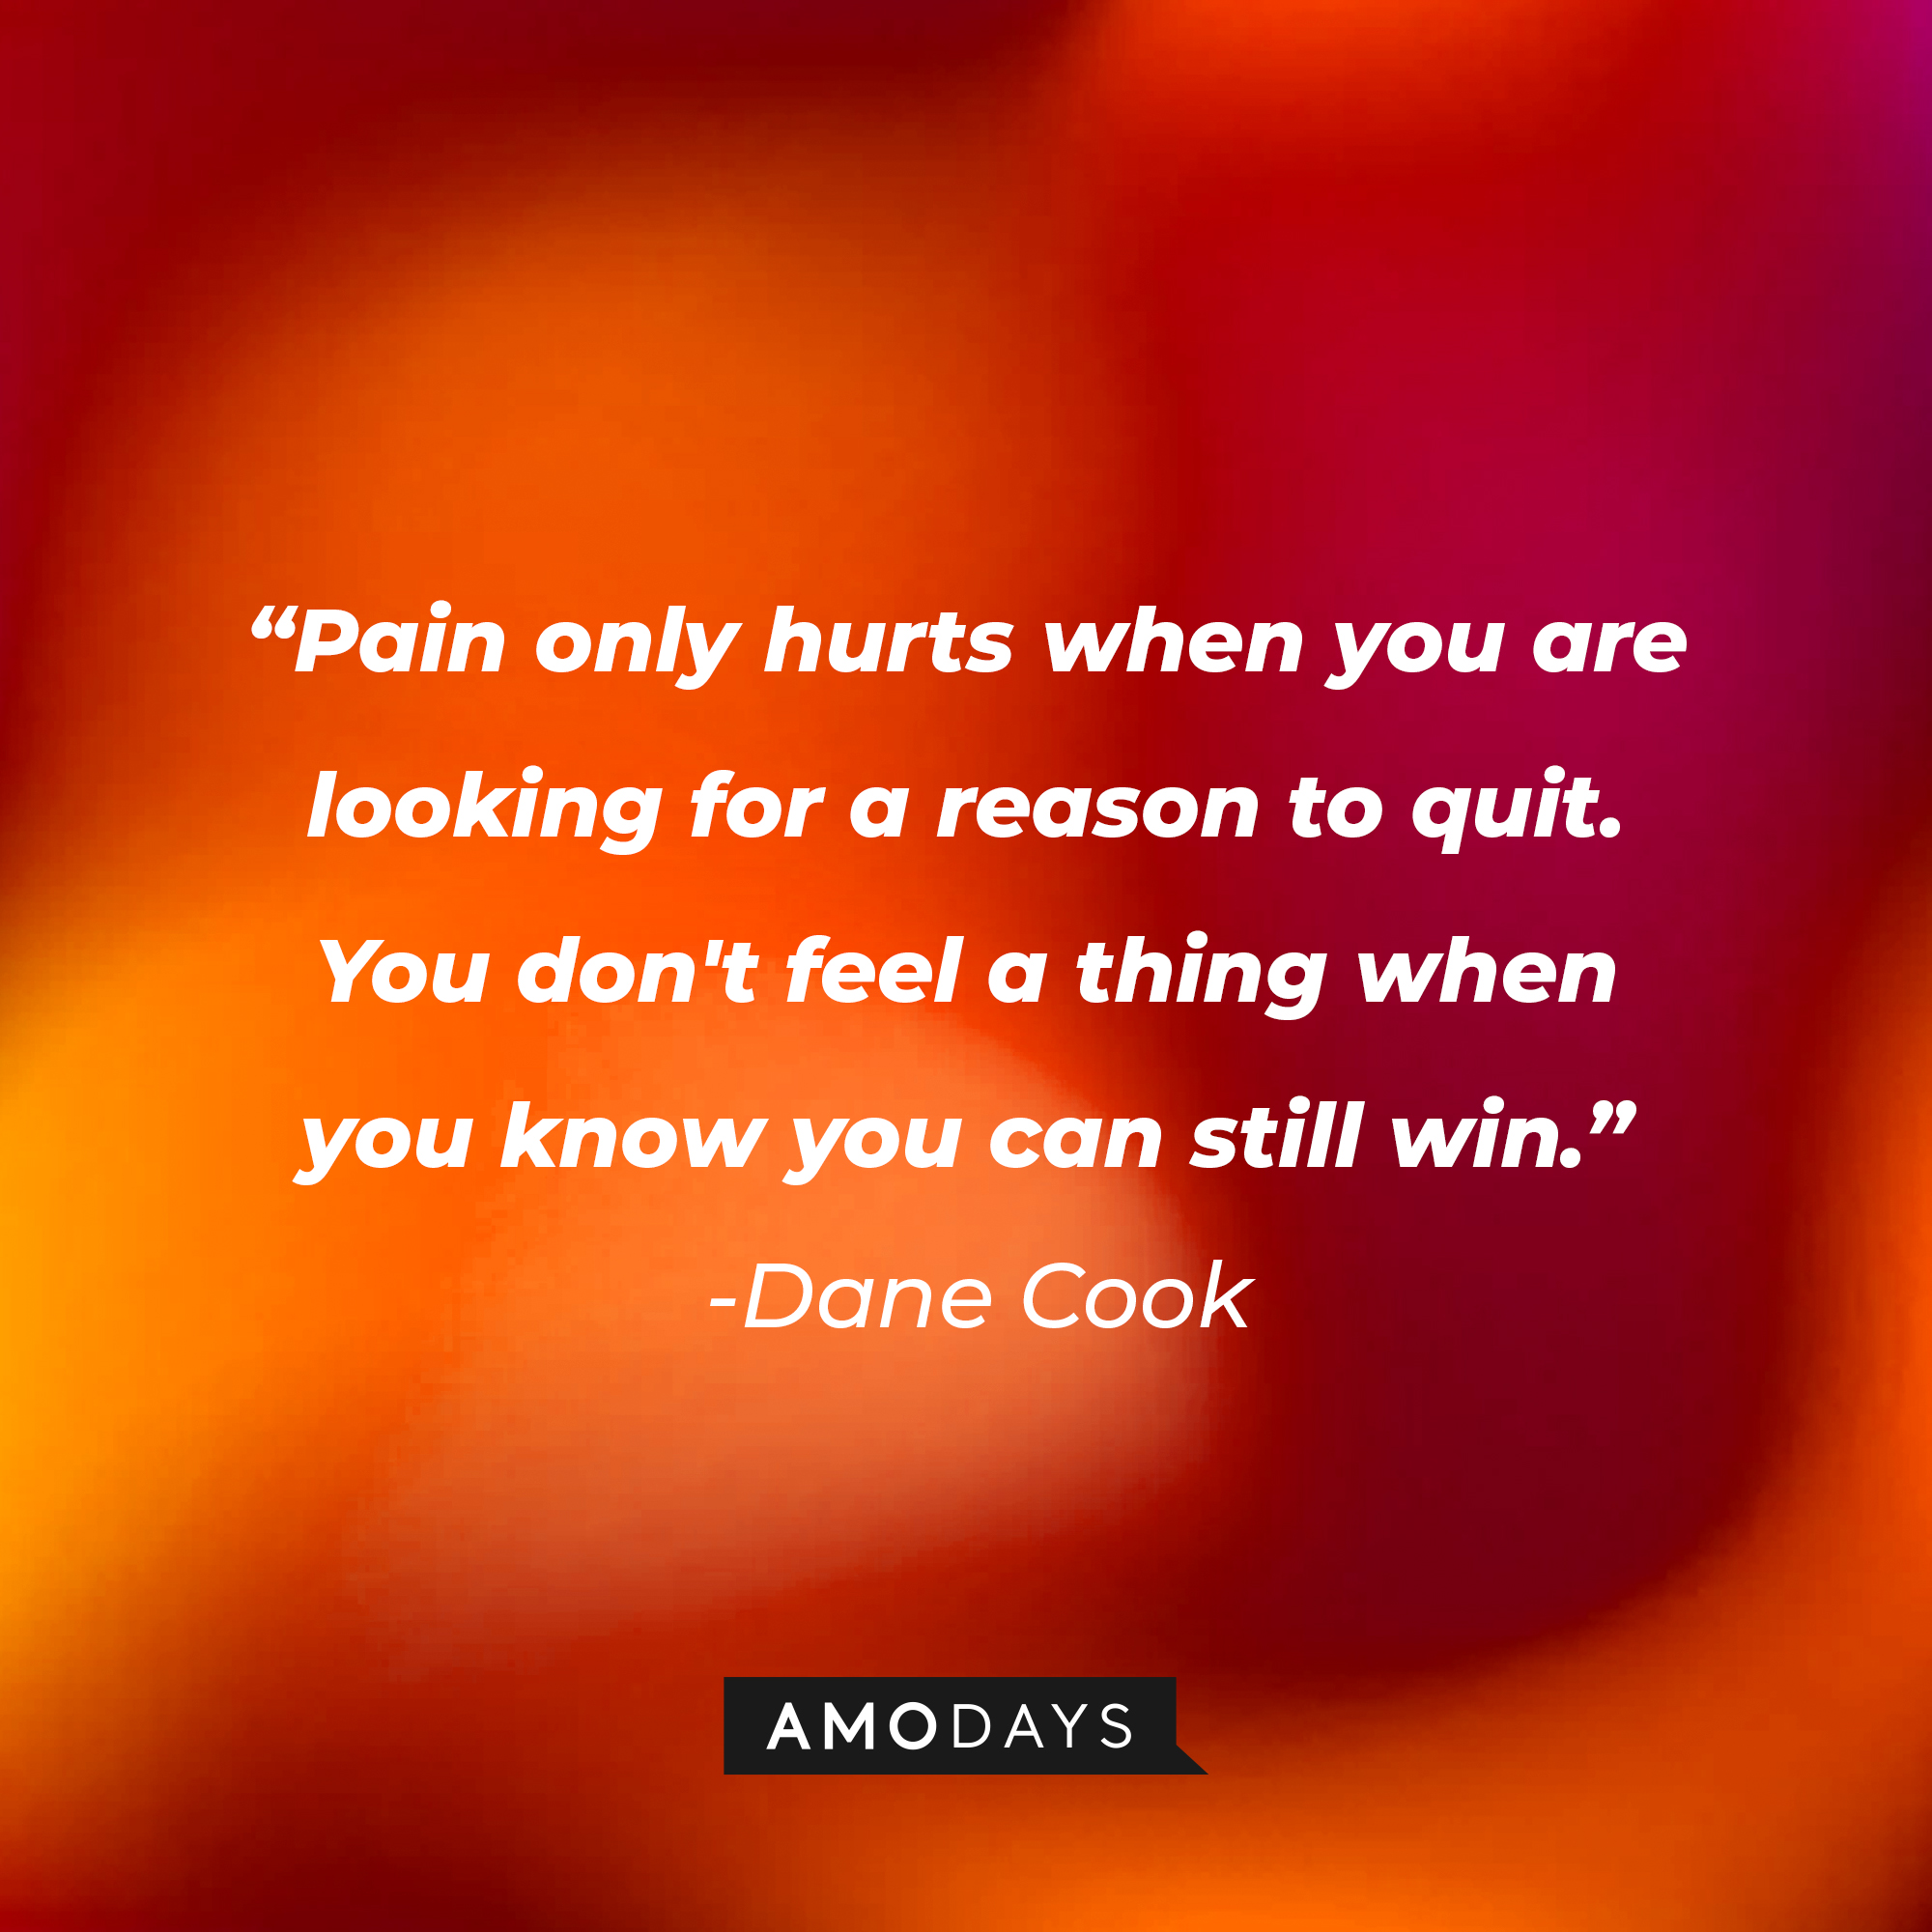 Dane Cook's quote: “Pain only hurts when you are looking for a reason to quit. You don't feel a thing when you know you can still win.” | Source: Amodays